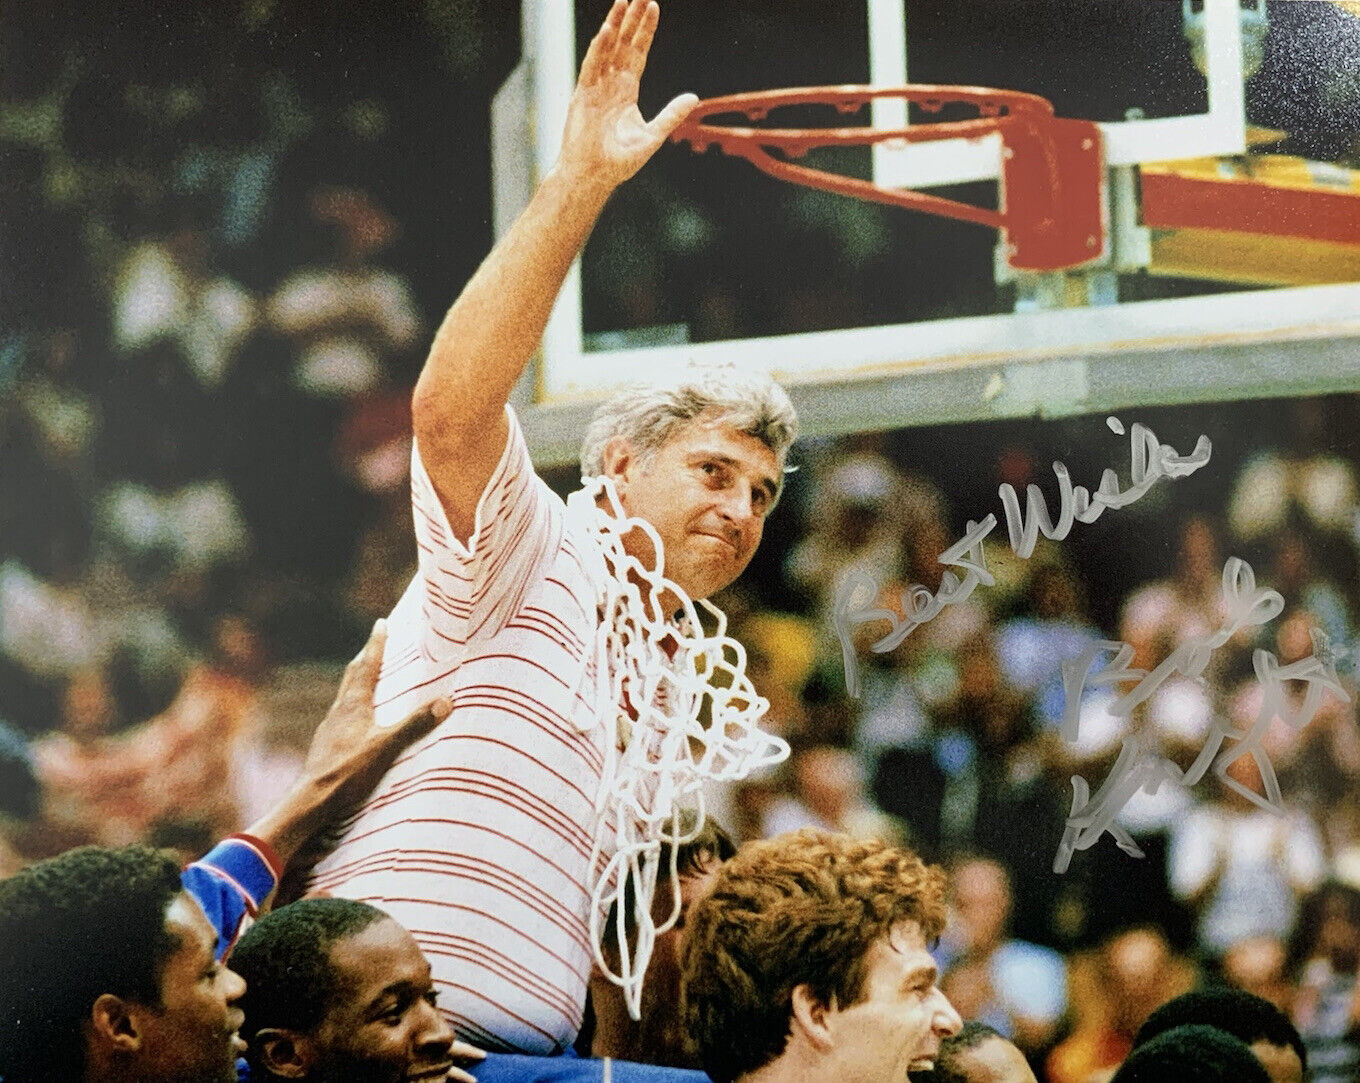 BOBBY KNIGHT HAND SIGNED 8x10 Photo Poster painting INDIANA BASKETBALL COACH AUTOGRAPH COA